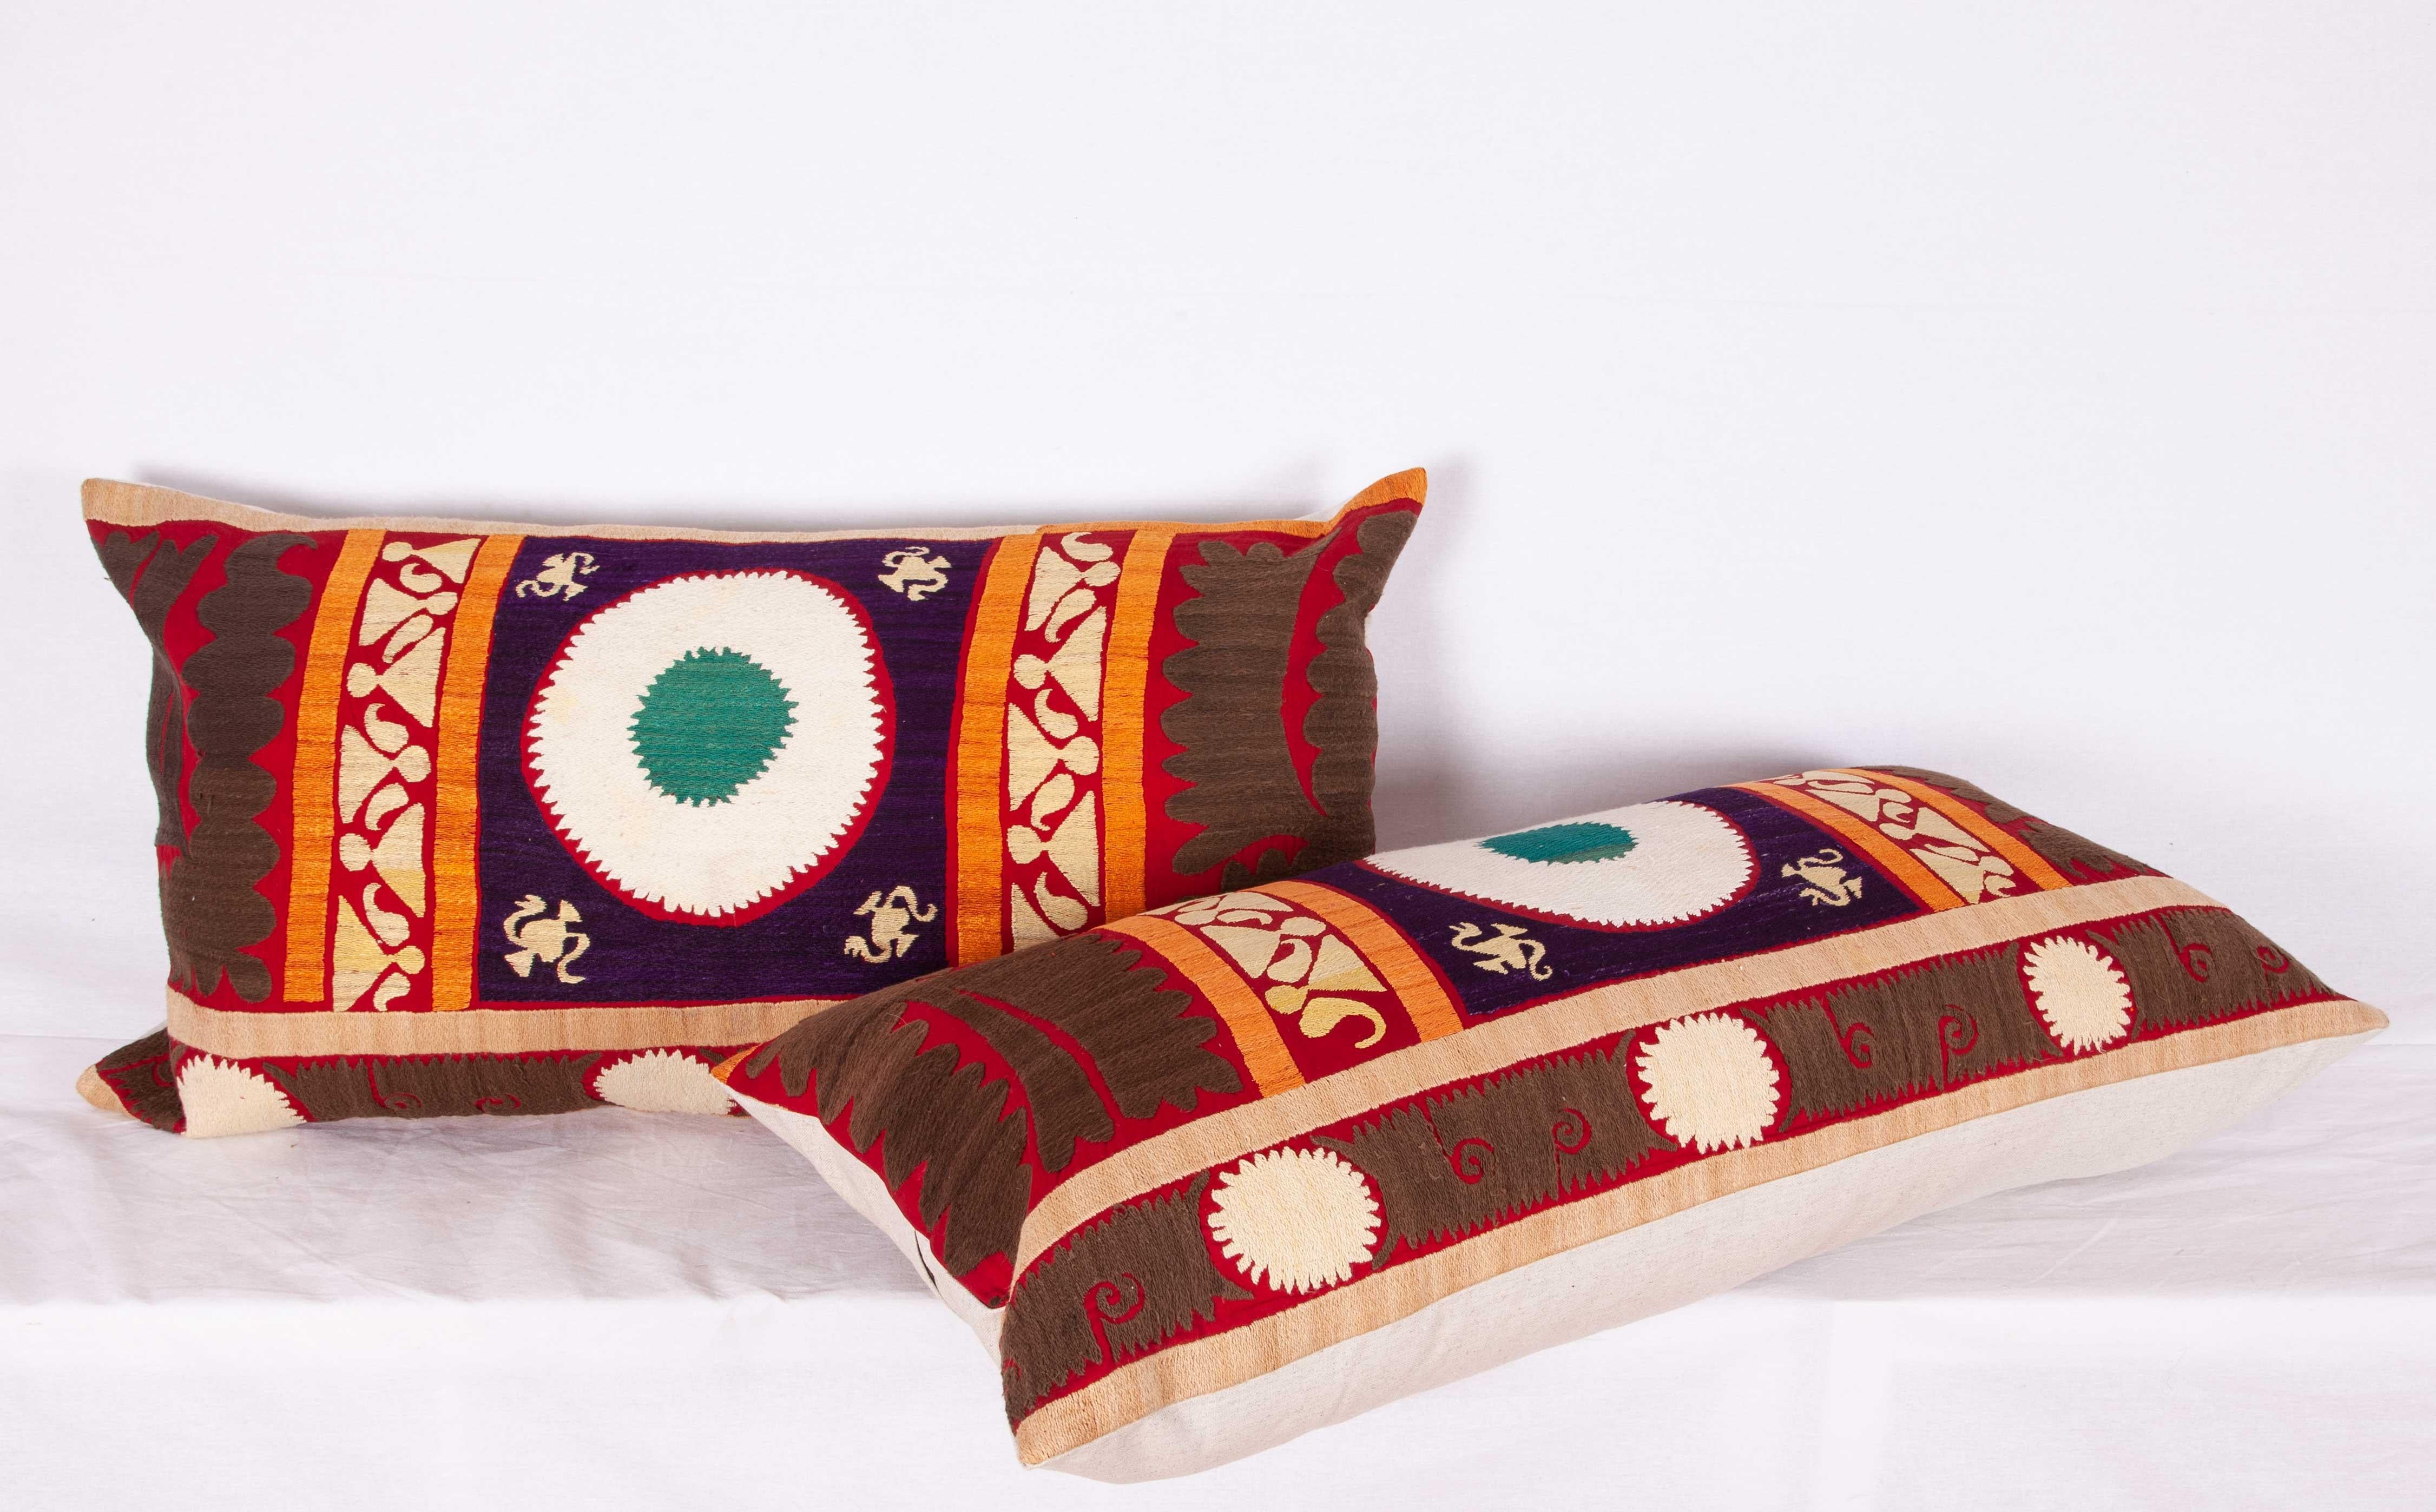 Embroidered Vintage Suzani Pillow Cases / Cushion Covers Made from a Mid-20th Century Suzani For Sale